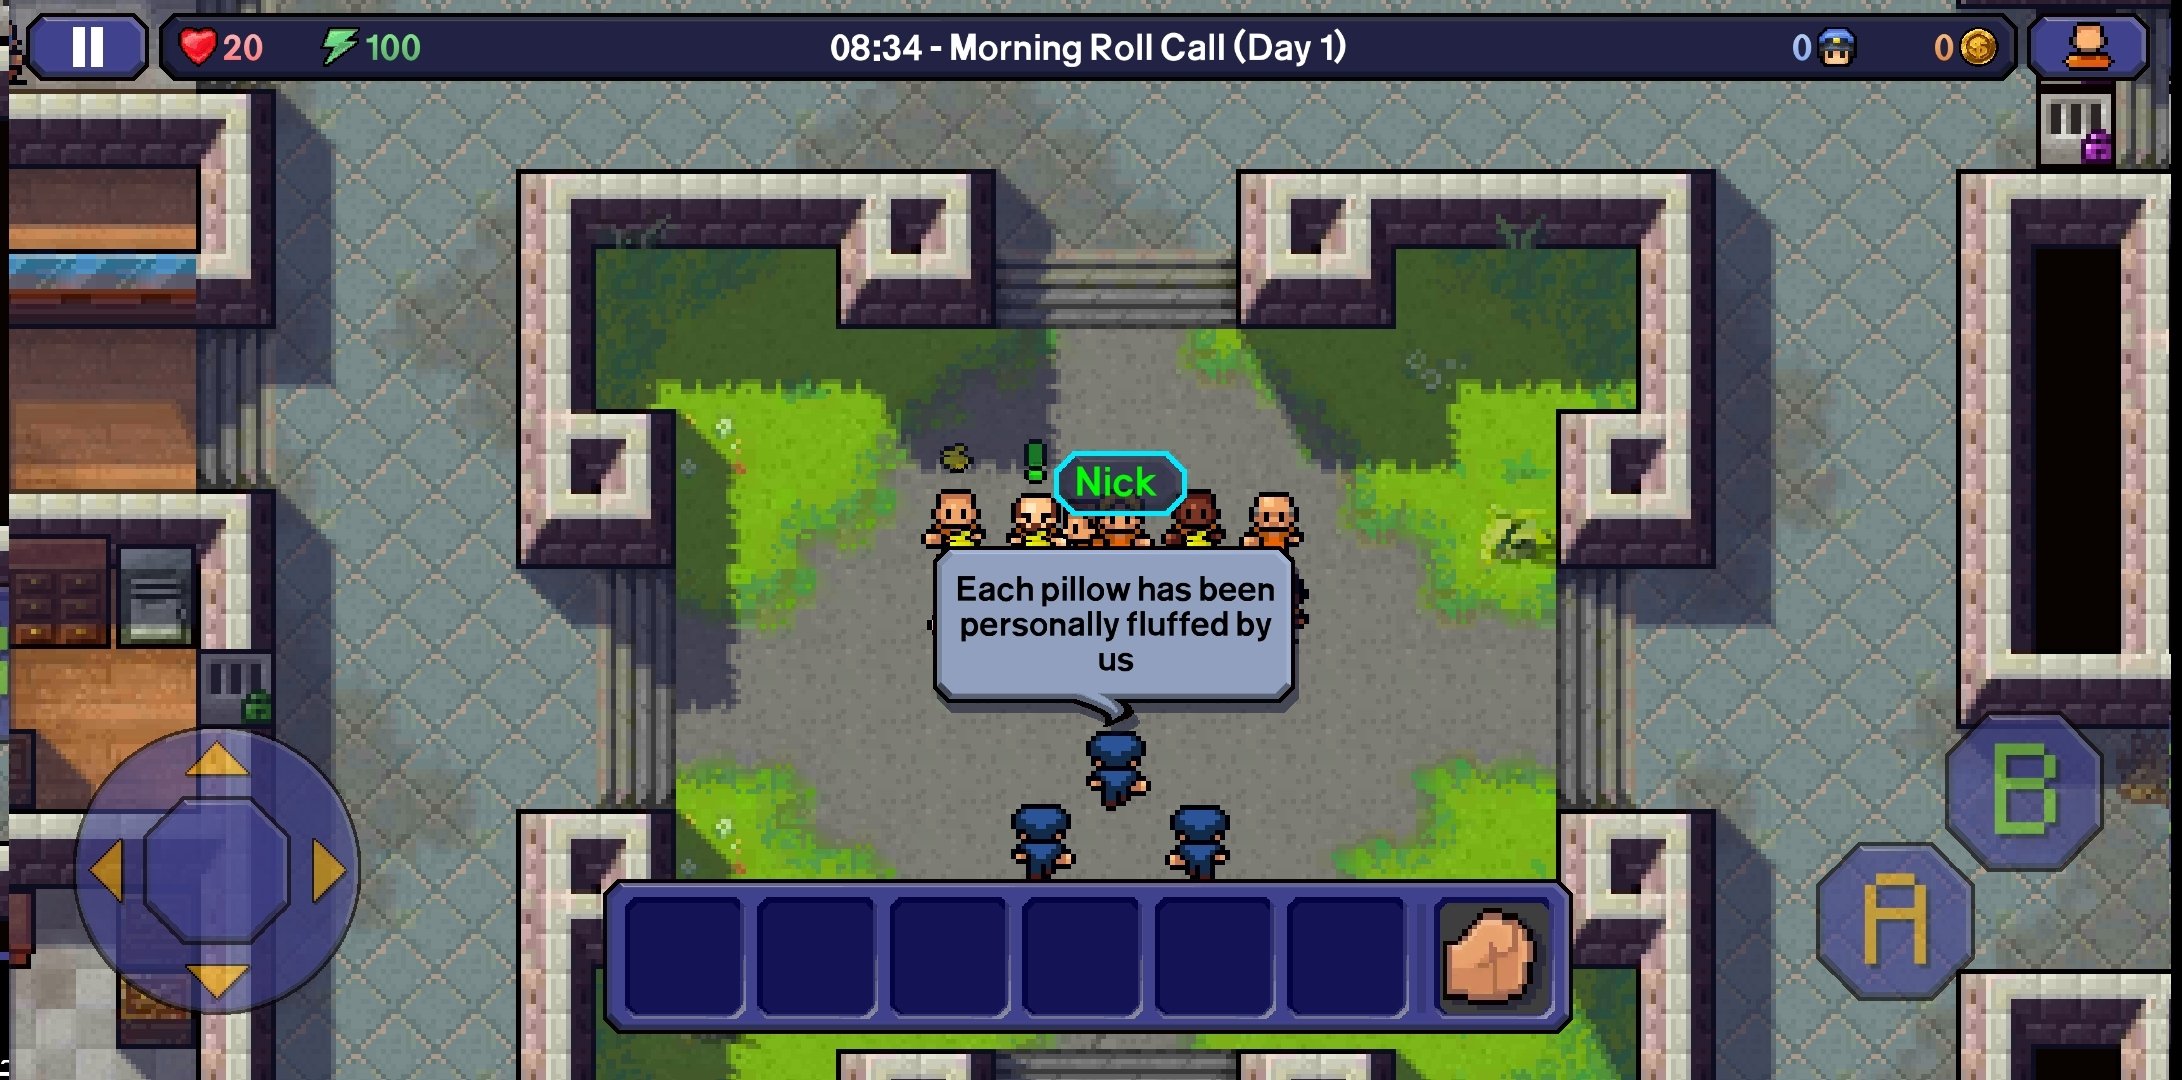 download free the escapists games